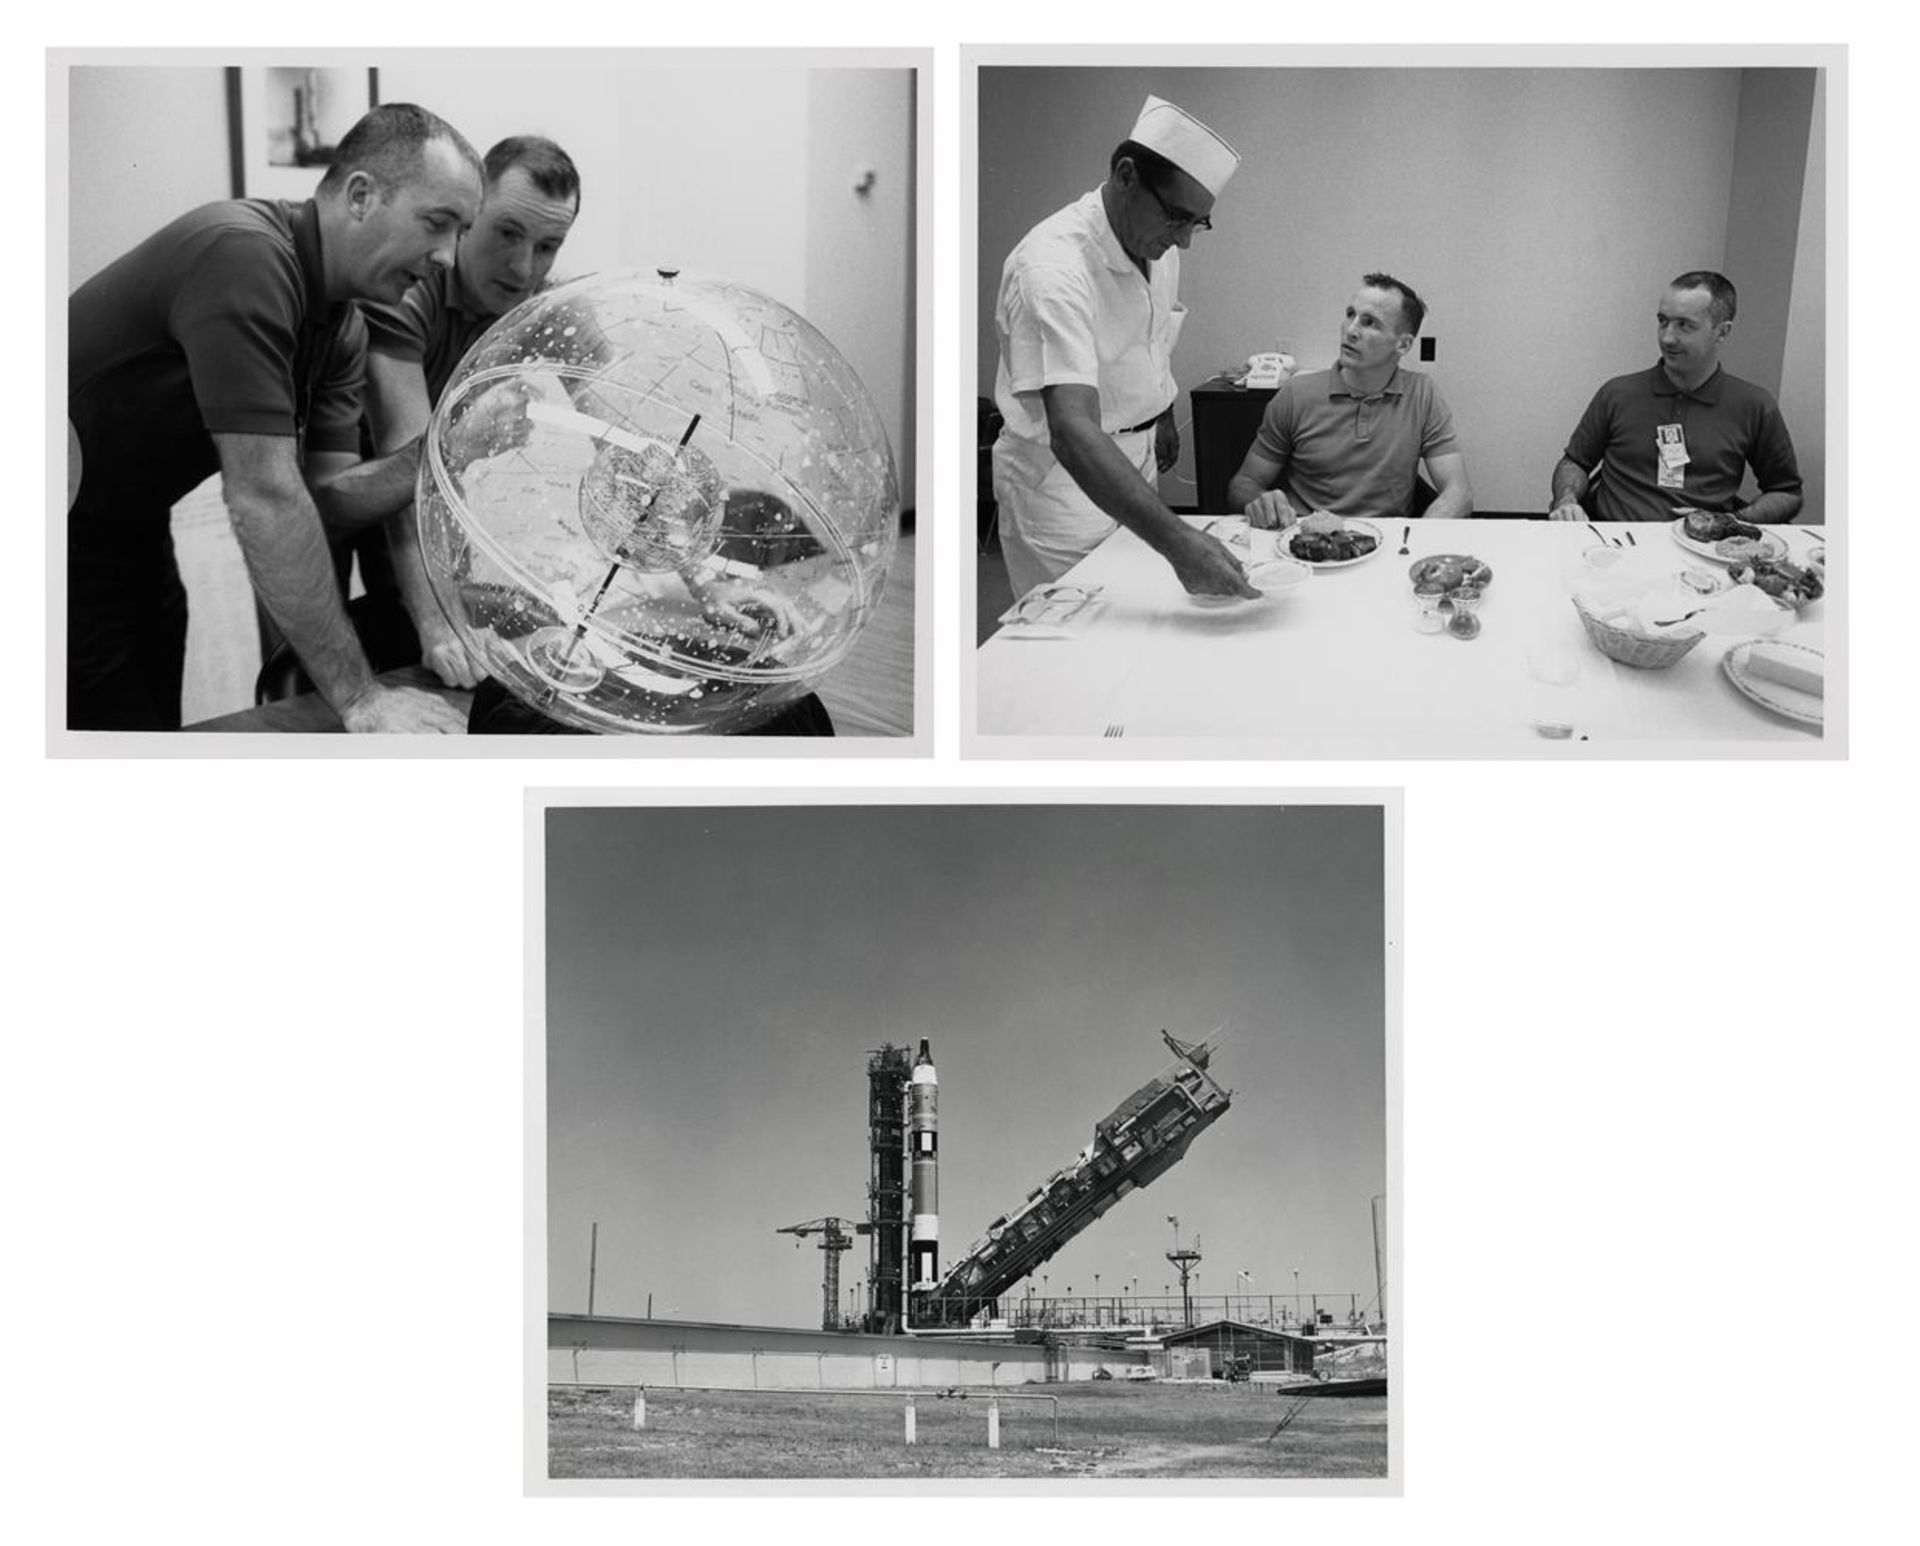 The crew and the Titan rocket for the first U.S. spacewalk mission (3 photos), Gemini 4, May 1965